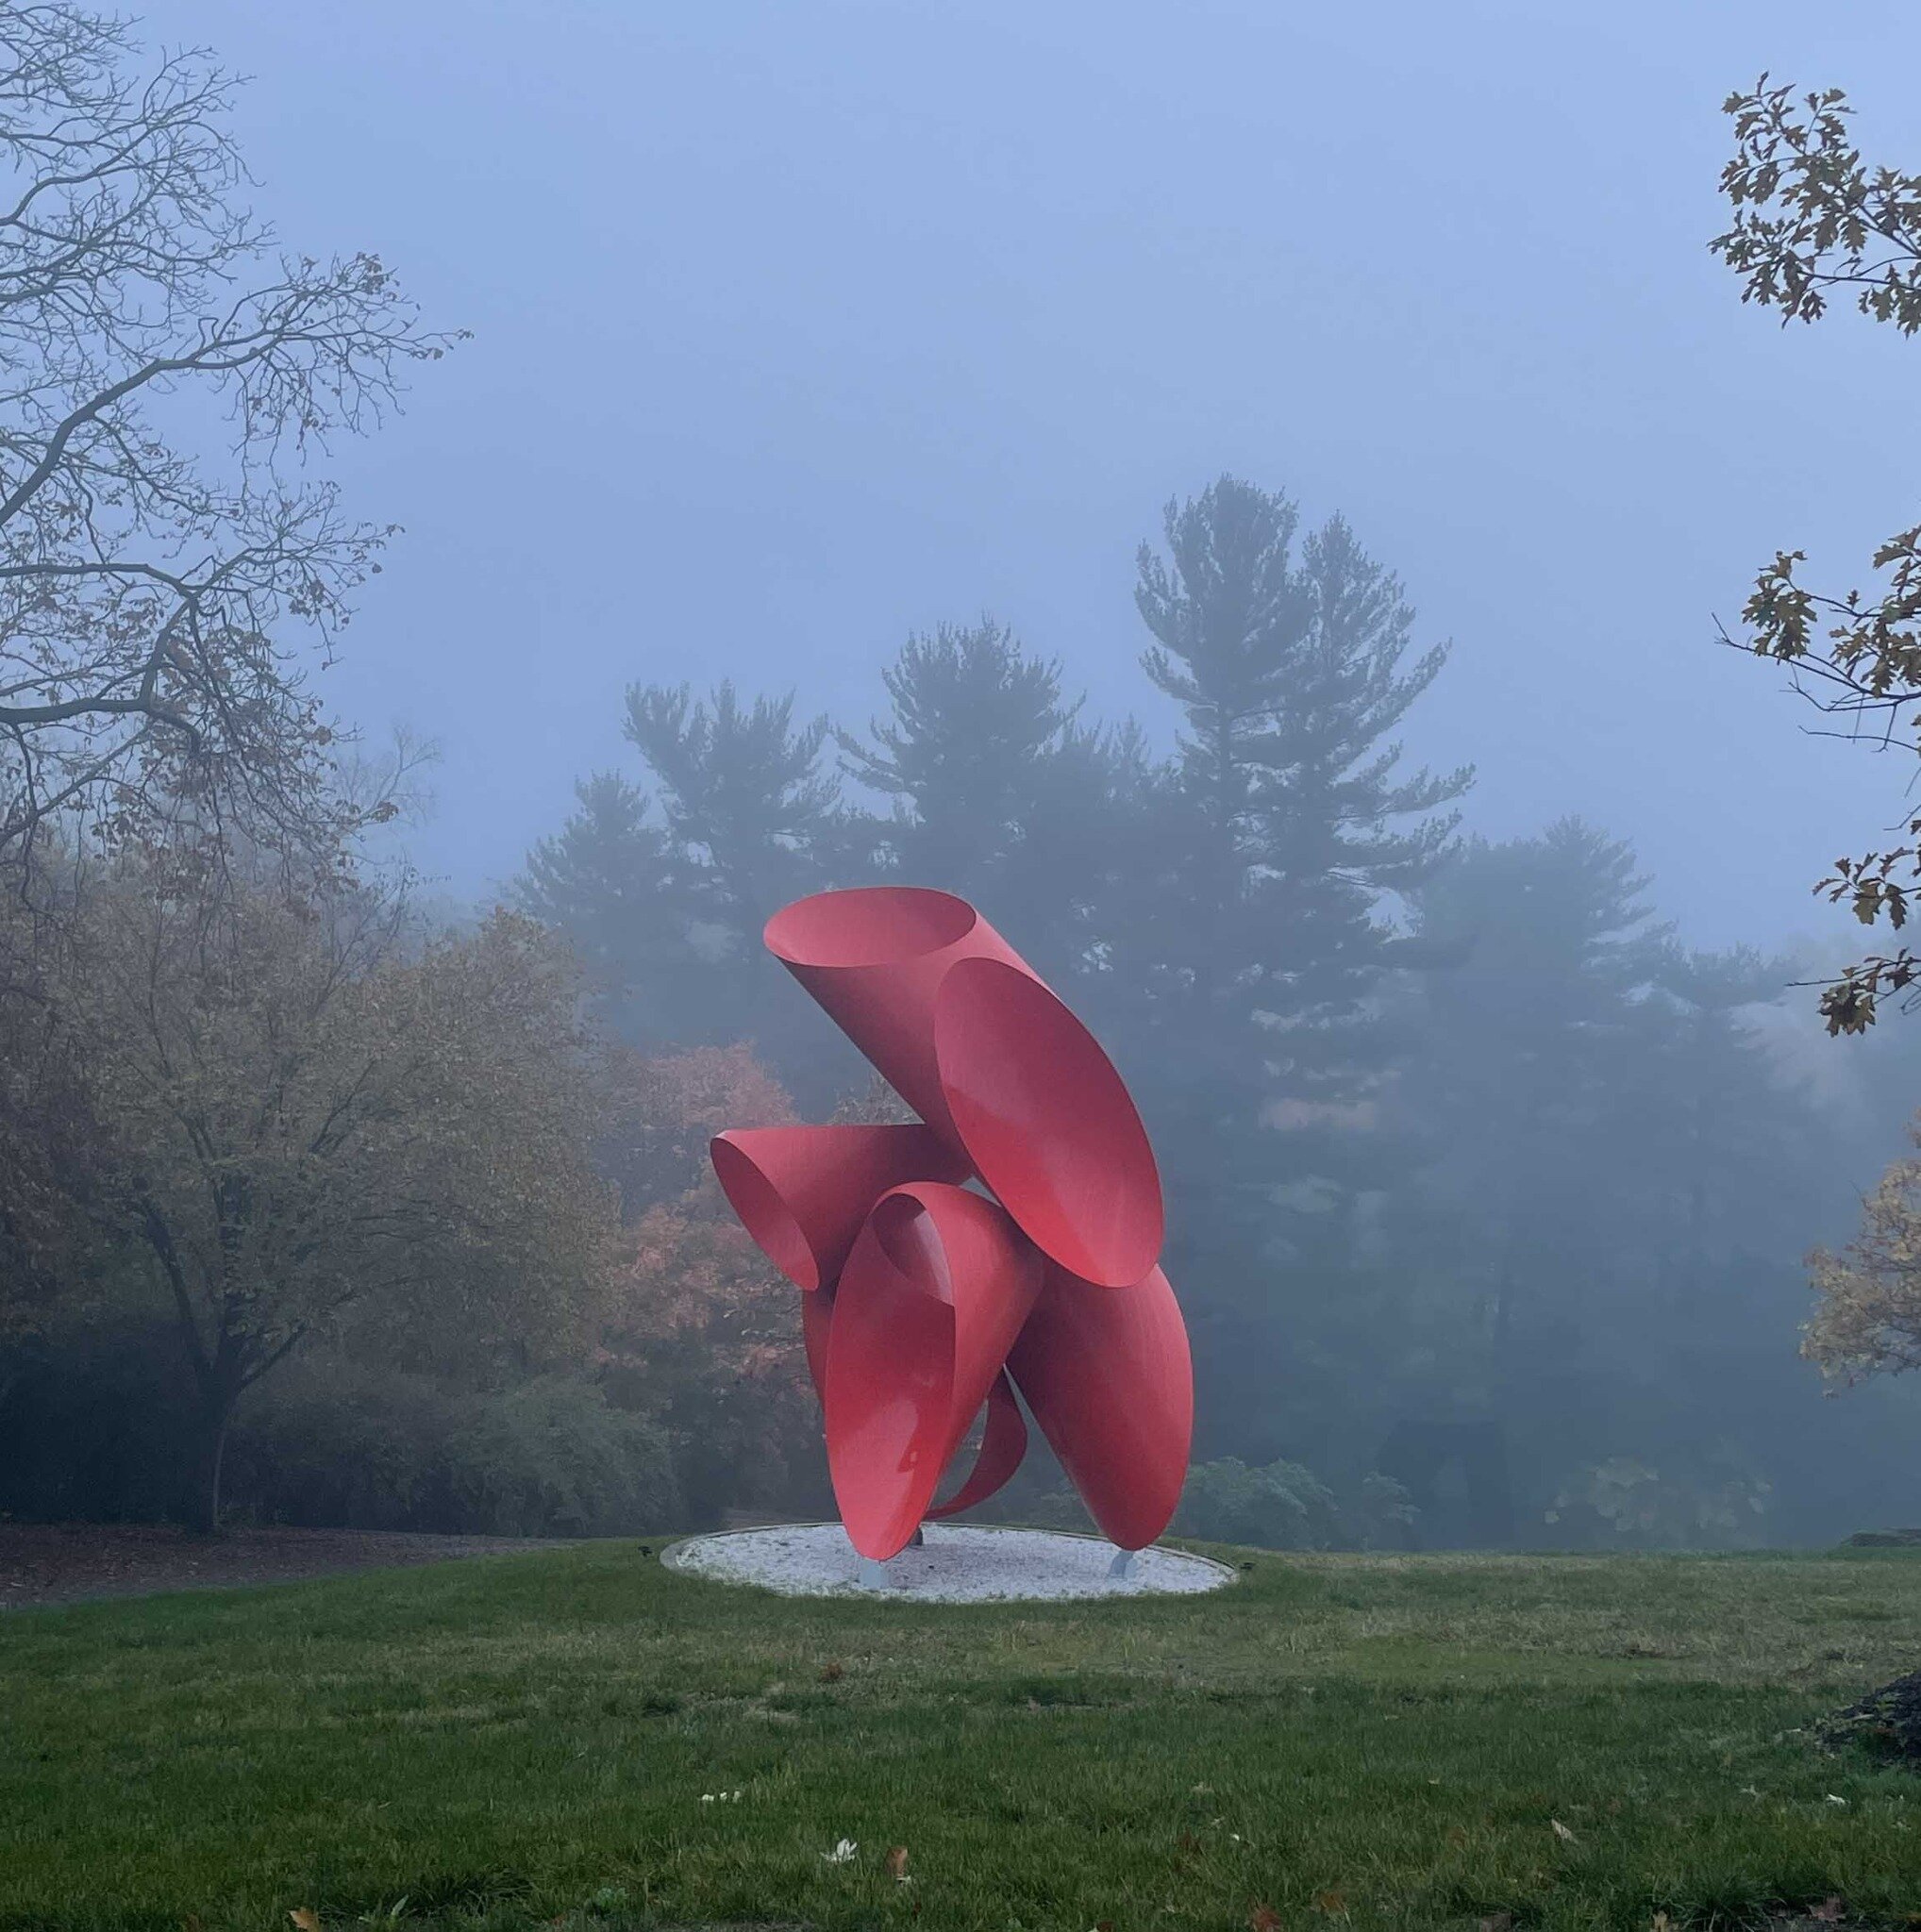 Alexander Liberman
𝘼𝙗𝙤𝙫𝙚 𝙄𝙄
1973
20 x 15.5 x 12.5 feet
painted steel

Restored by VAF in 2021 after the sculpture had been crushed by copper beech trees felled during a storm. Located at Kykuit, Rockefeller Estate.